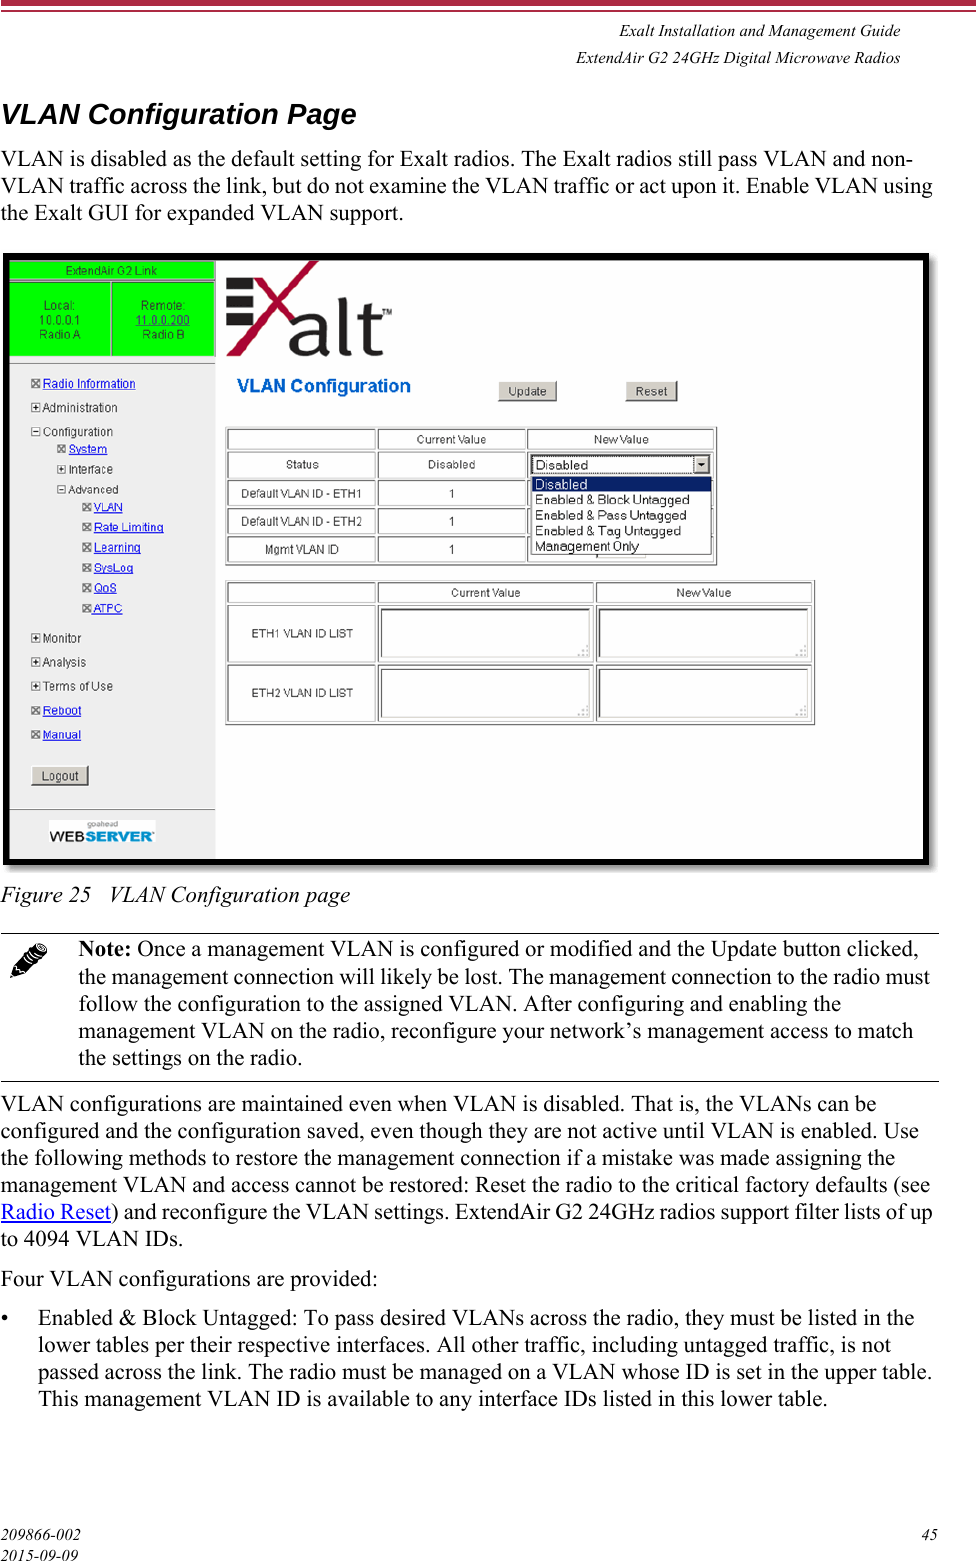 Exalt Installation and Management GuideExtendAir G2 24GHz Digital Microwave Radios209866-002 452015-09-09VLAN Configuration PageVLAN is disabled as the default setting for Exalt radios. The Exalt radios still pass VLAN and non-VLAN traffic across the link, but do not examine the VLAN traffic or act upon it. Enable VLAN using the Exalt GUI for expanded VLAN support.Figure 25   VLAN Configuration pageVLAN configurations are maintained even when VLAN is disabled. That is, the VLANs can be configured and the configuration saved, even though they are not active until VLAN is enabled. Use the following methods to restore the management connection if a mistake was made assigning the management VLAN and access cannot be restored: Reset the radio to the critical factory defaults (see Radio Reset) and reconfigure the VLAN settings. ExtendAir G2 24GHz radios support filter lists of up to 4094 VLAN IDs. Four VLAN configurations are provided:• Enabled &amp; Block Untagged: To pass desired VLANs across the radio, they must be listed in the lower tables per their respective interfaces. All other traffic, including untagged traffic, is not passed across the link. The radio must be managed on a VLAN whose ID is set in the upper table. This management VLAN ID is available to any interface IDs listed in this lower table.Note: Once a management VLAN is configured or modified and the Update button clicked, the management connection will likely be lost. The management connection to the radio must follow the configuration to the assigned VLAN. After configuring and enabling the management VLAN on the radio, reconfigure your network’s management access to match the settings on the radio.